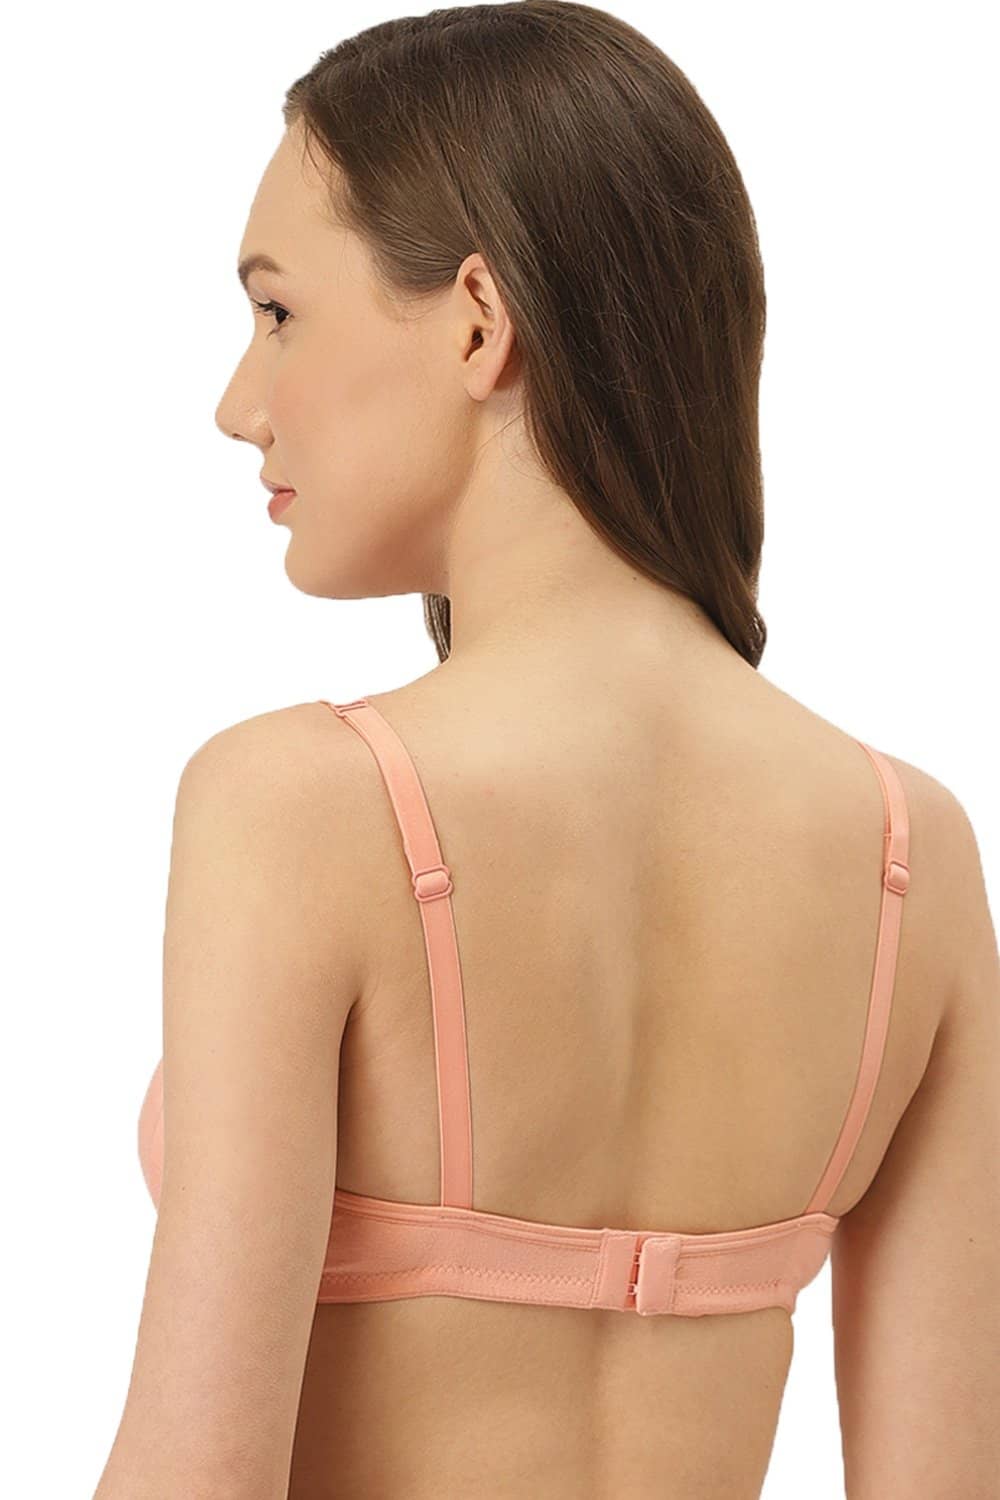 Organic Cotton Antimicrobial Spunky Pink Bra Kit (Pack of 3)-ISBK07-